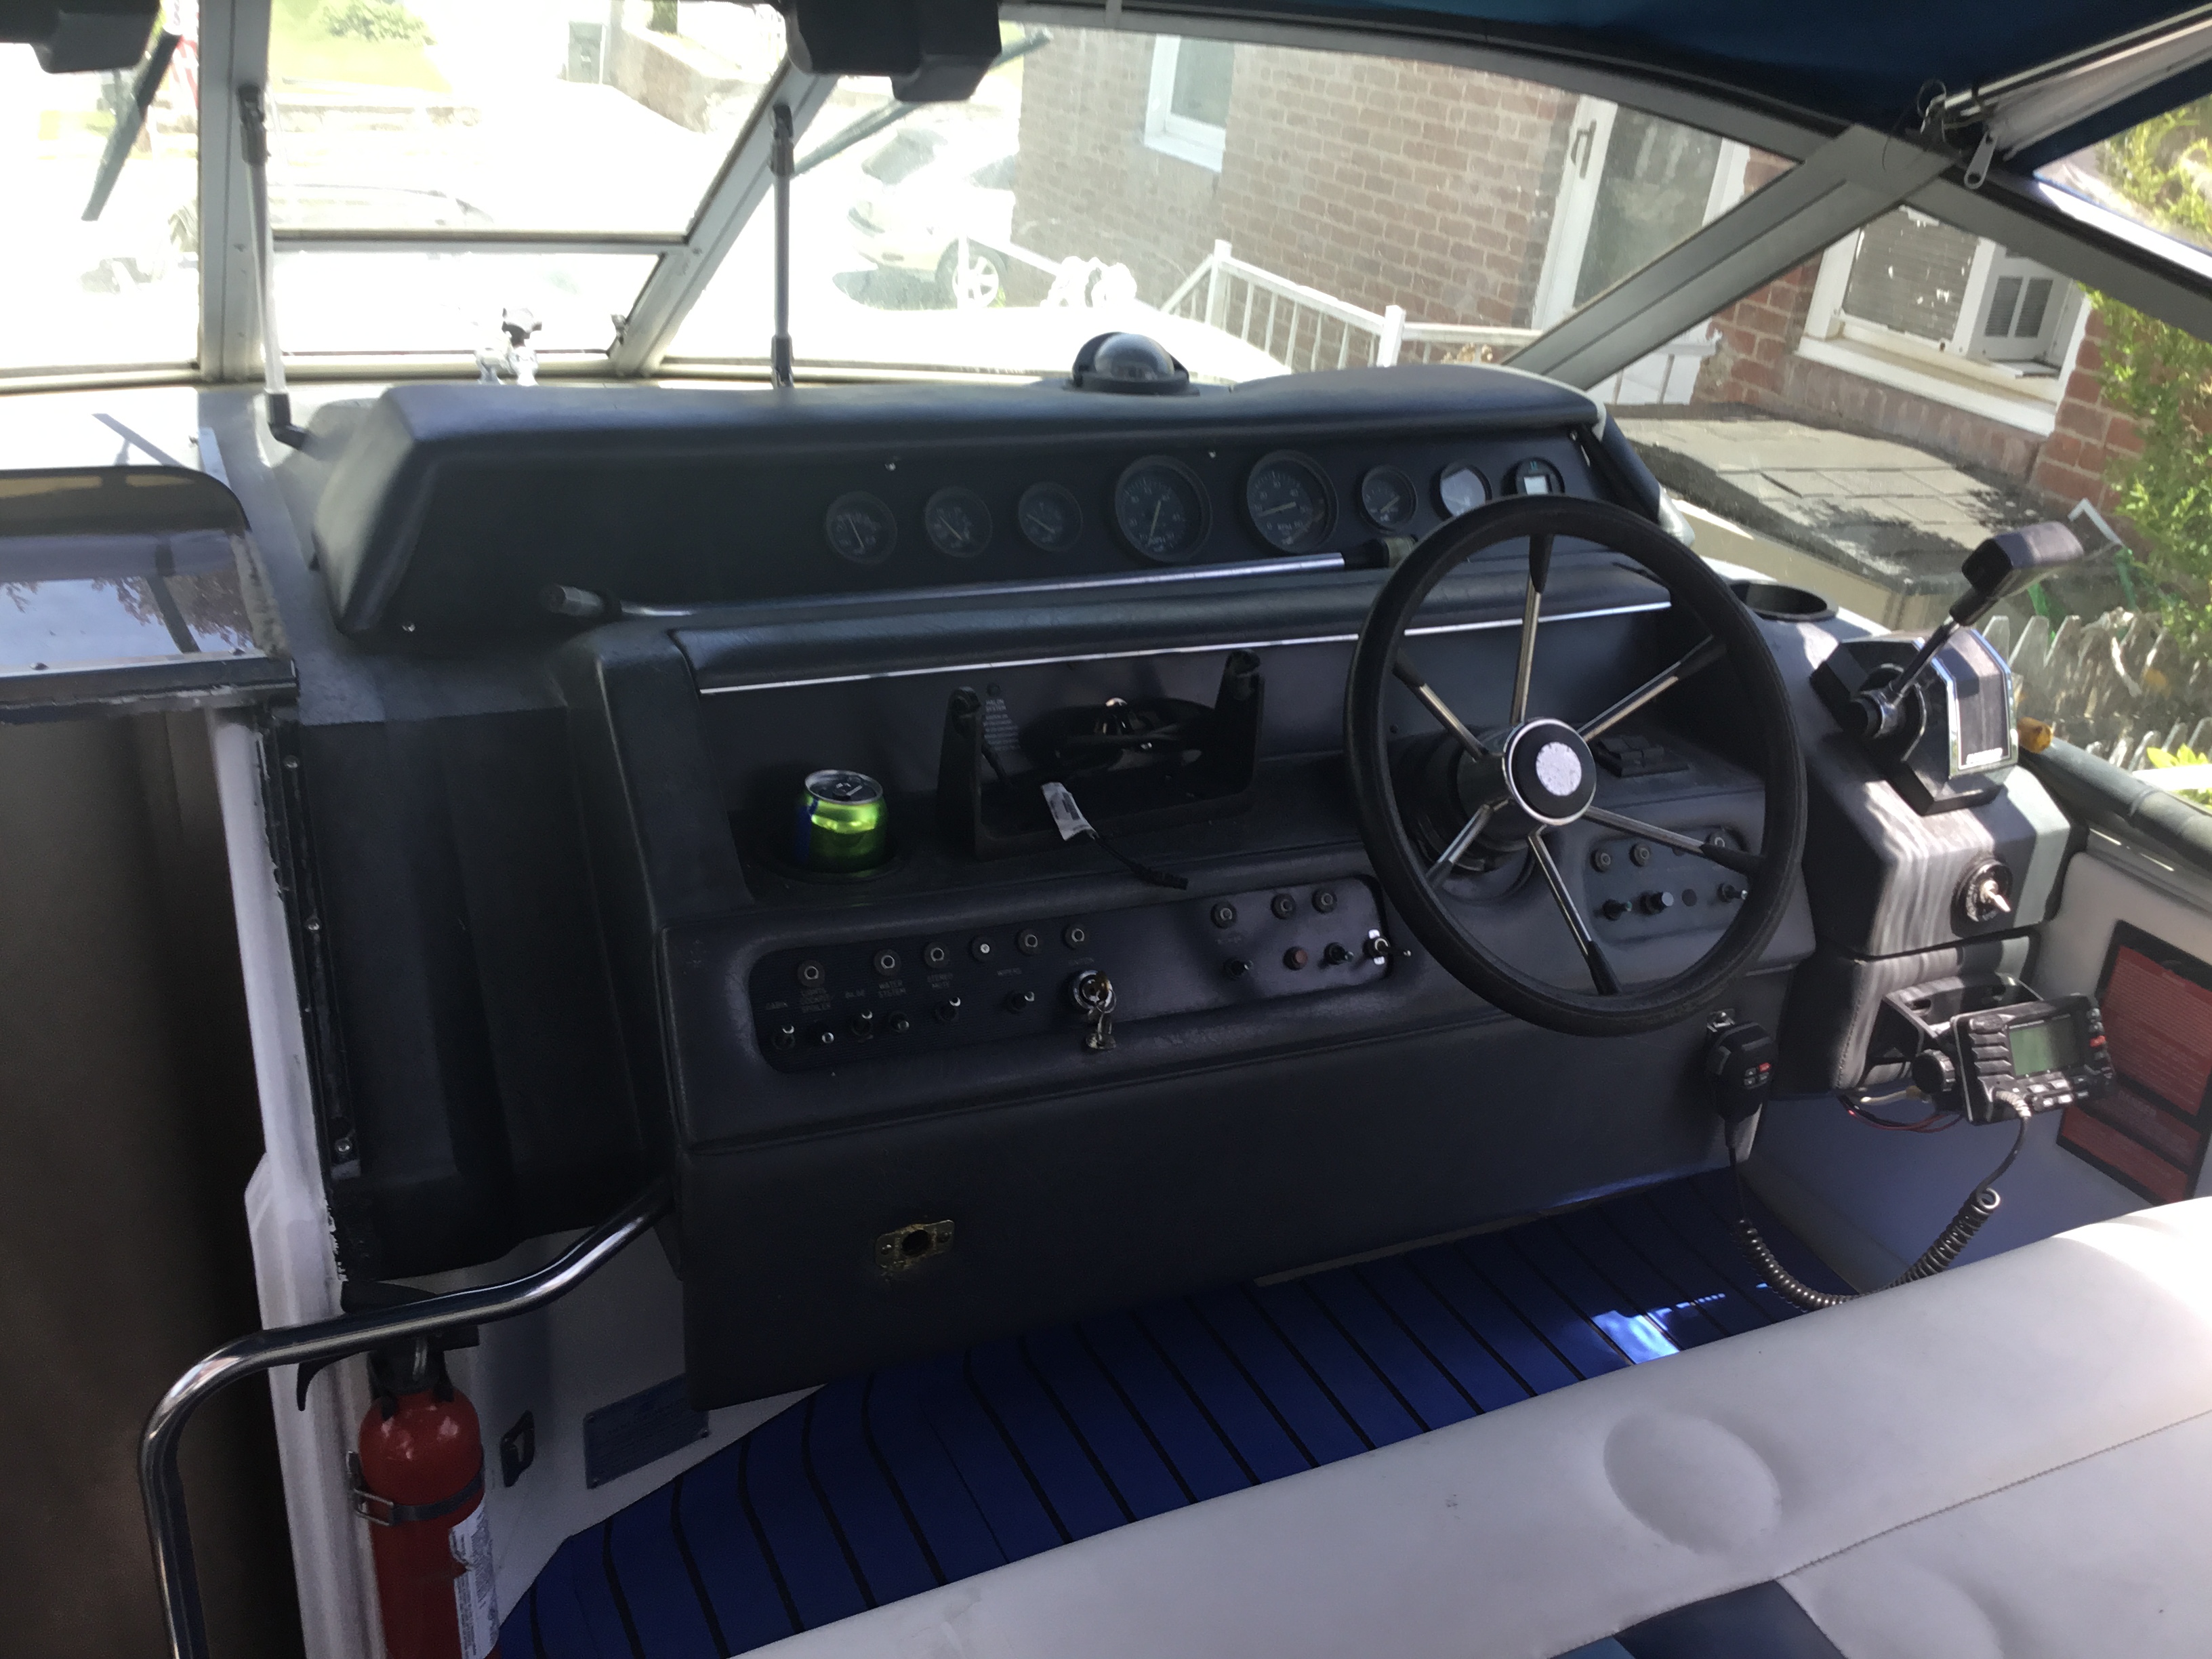 1993 30 foot Sea Ray Cabin CR Power boat for sale in New London, CT - image 6 